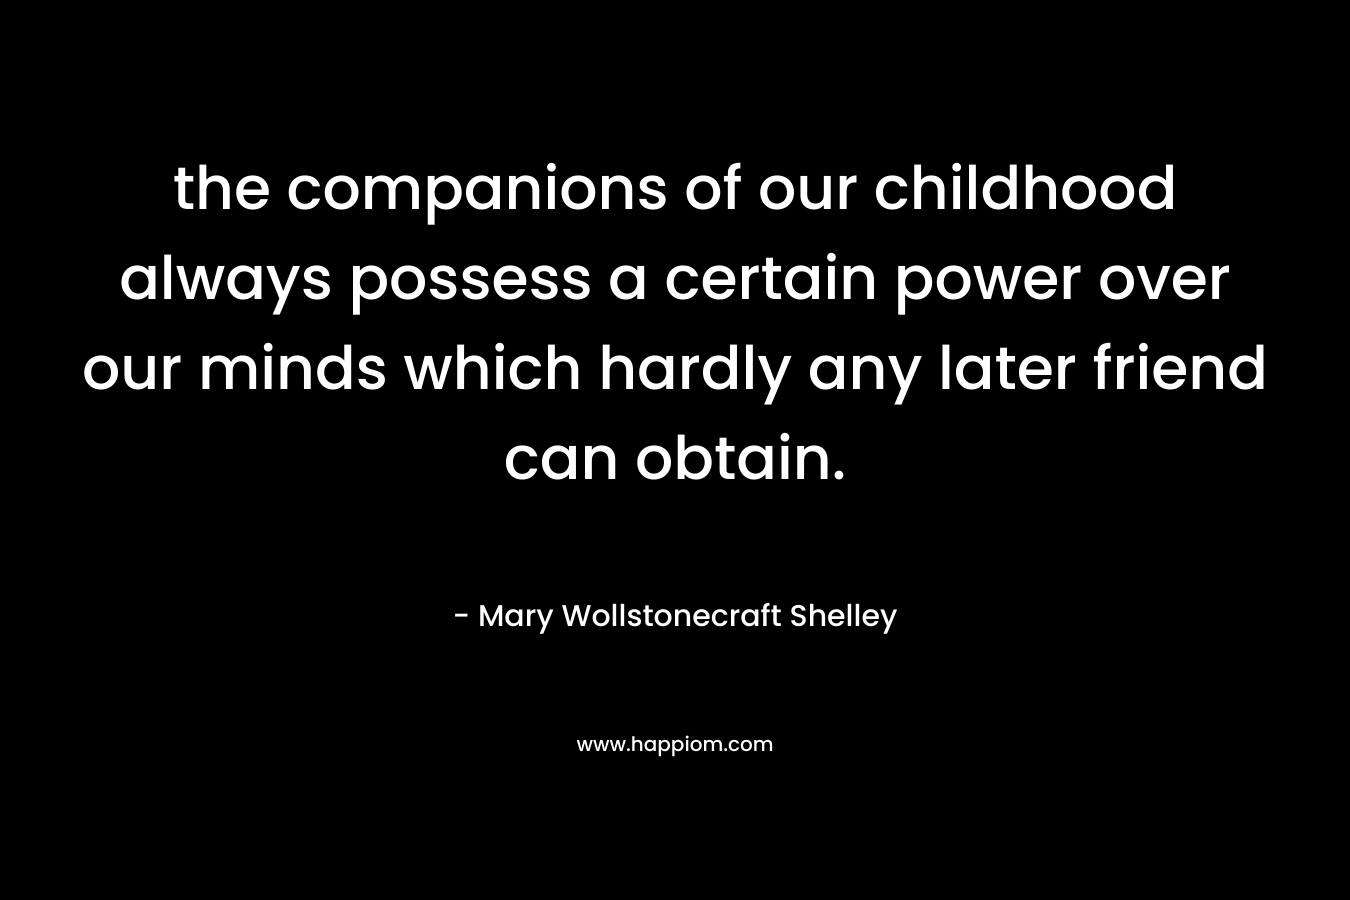 the companions of our childhood always possess a certain power over our minds which hardly any later friend can obtain.